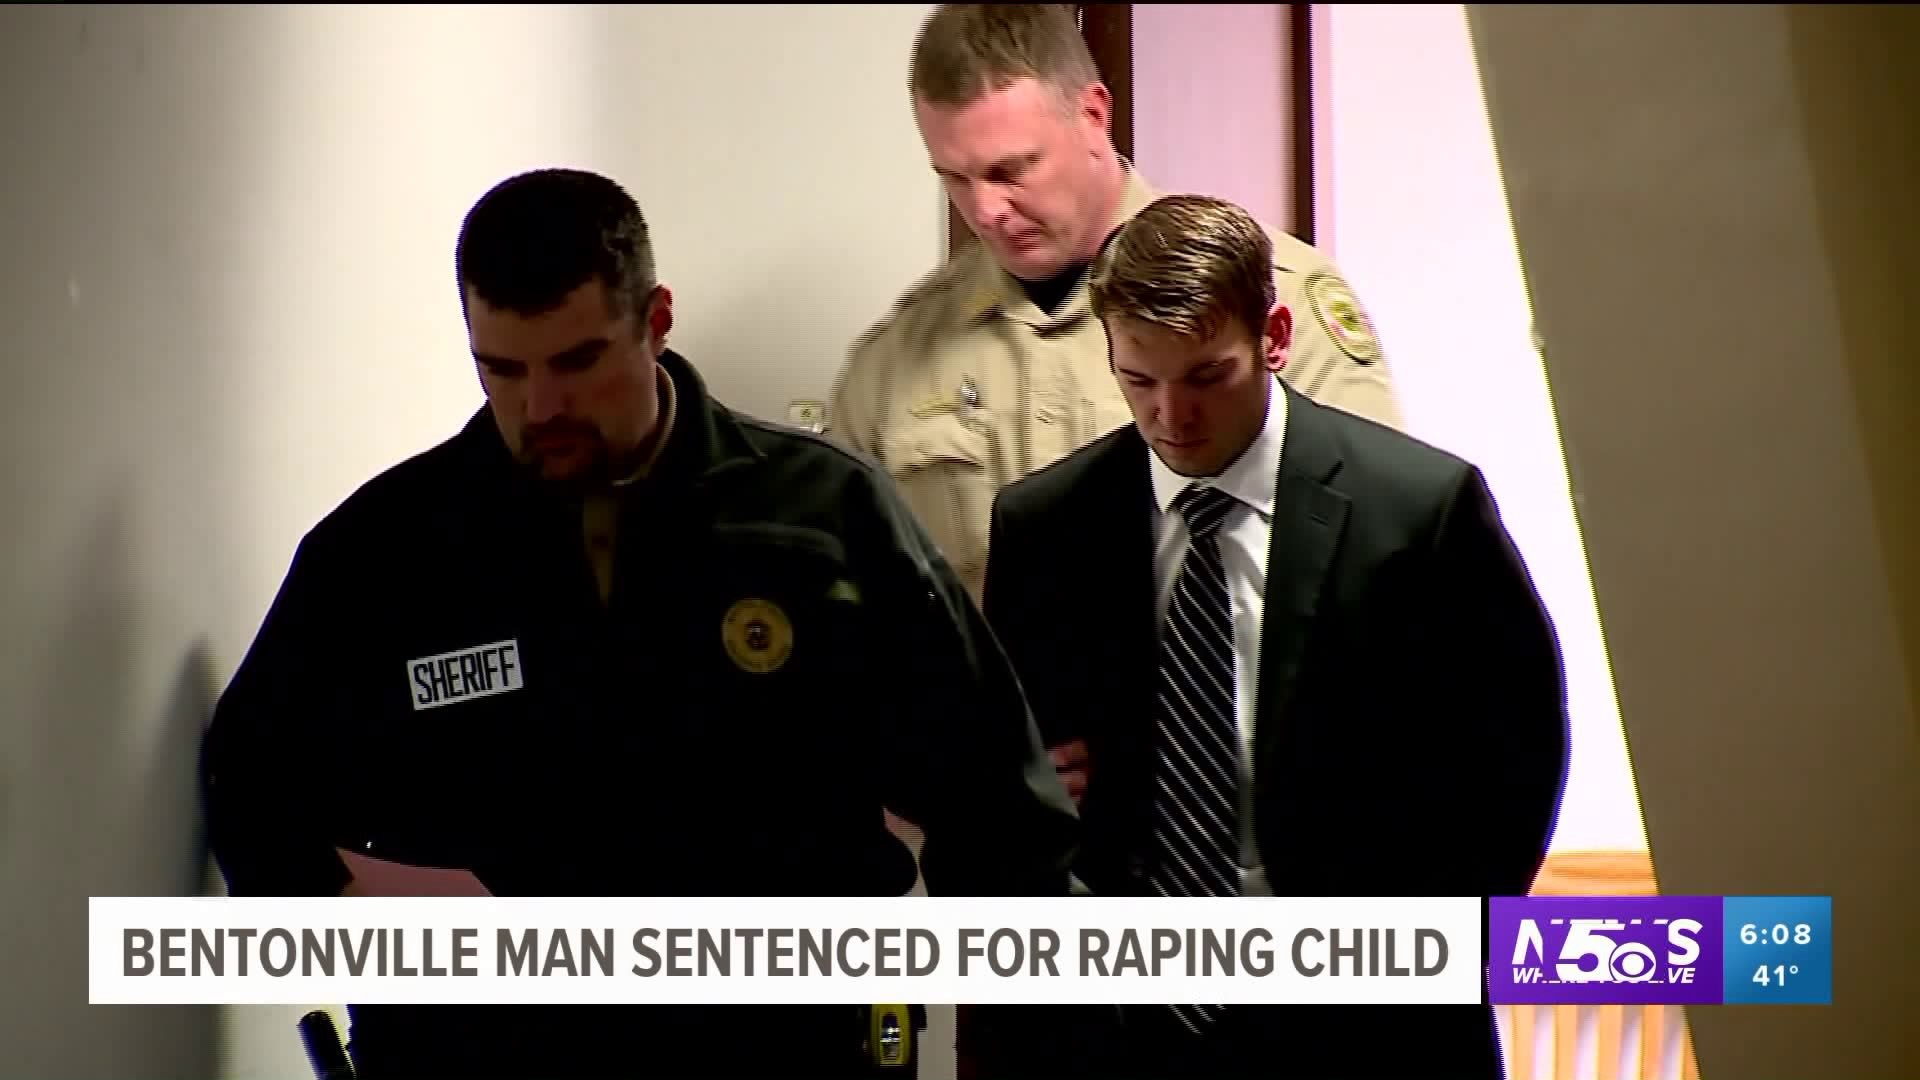 Bentonville Man Sentenced To 30 Years For Raping A Child